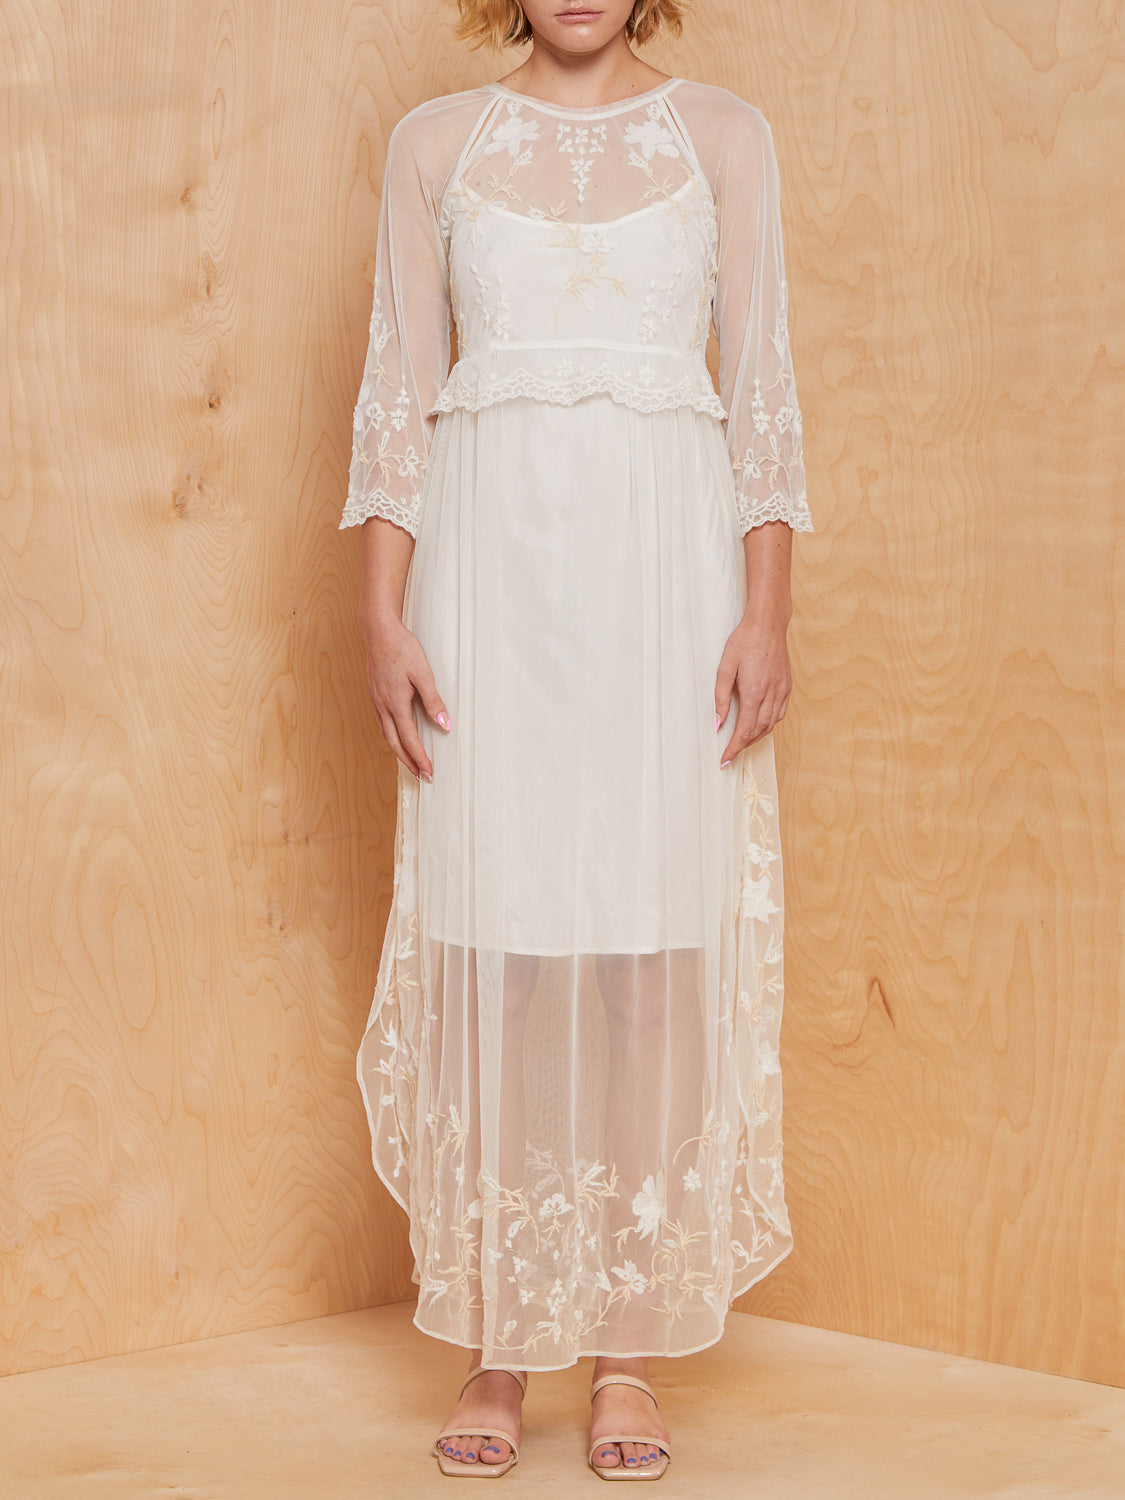 Free People Sheer Dress with Embroidery